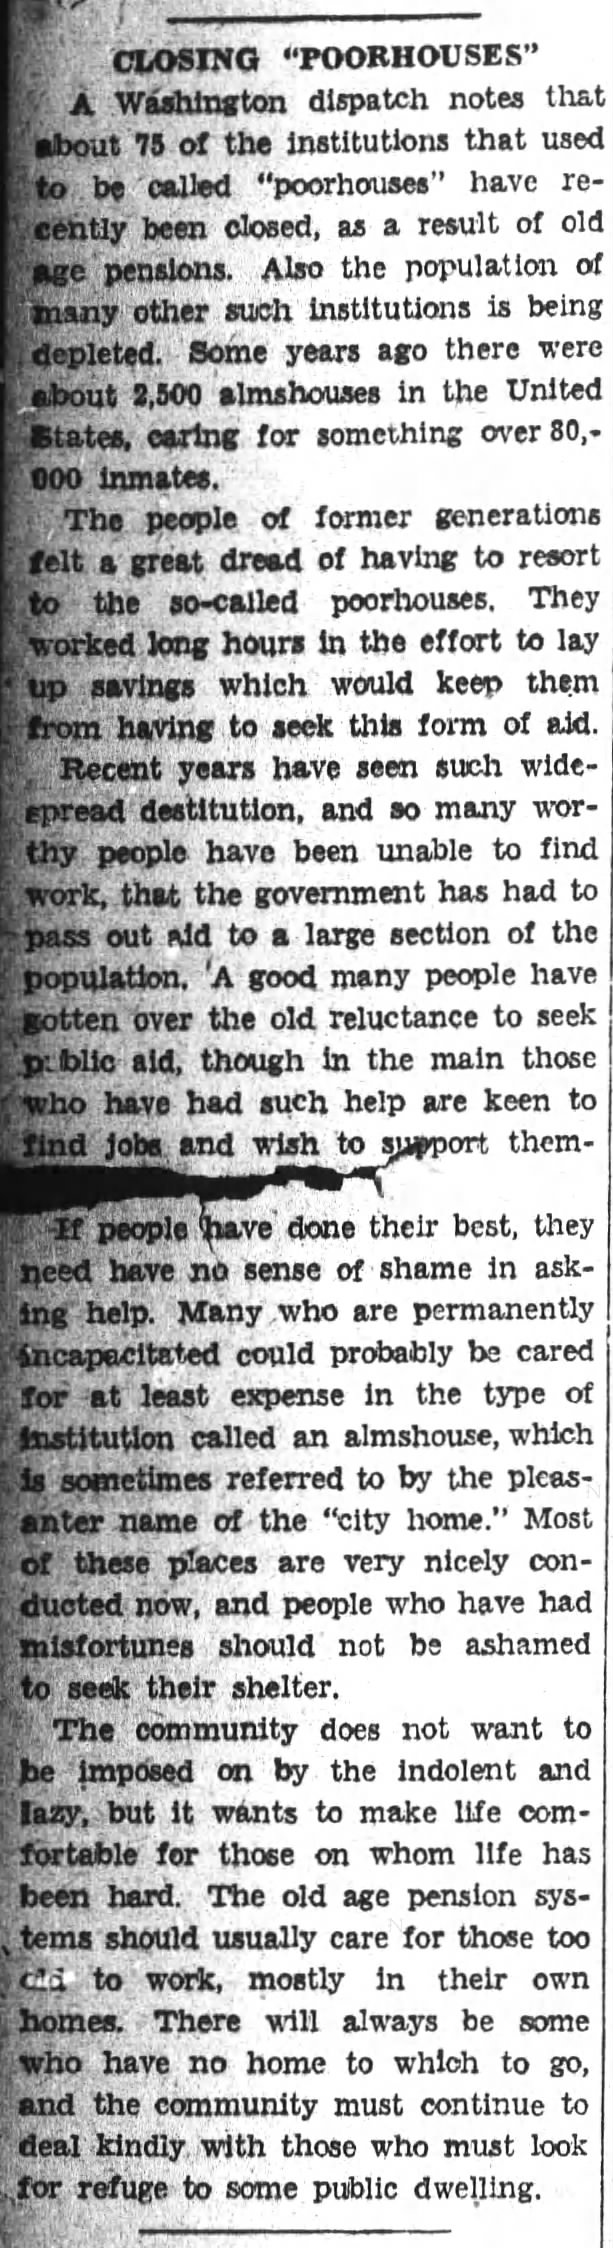 Article about why many poorhouses are closing, 1938